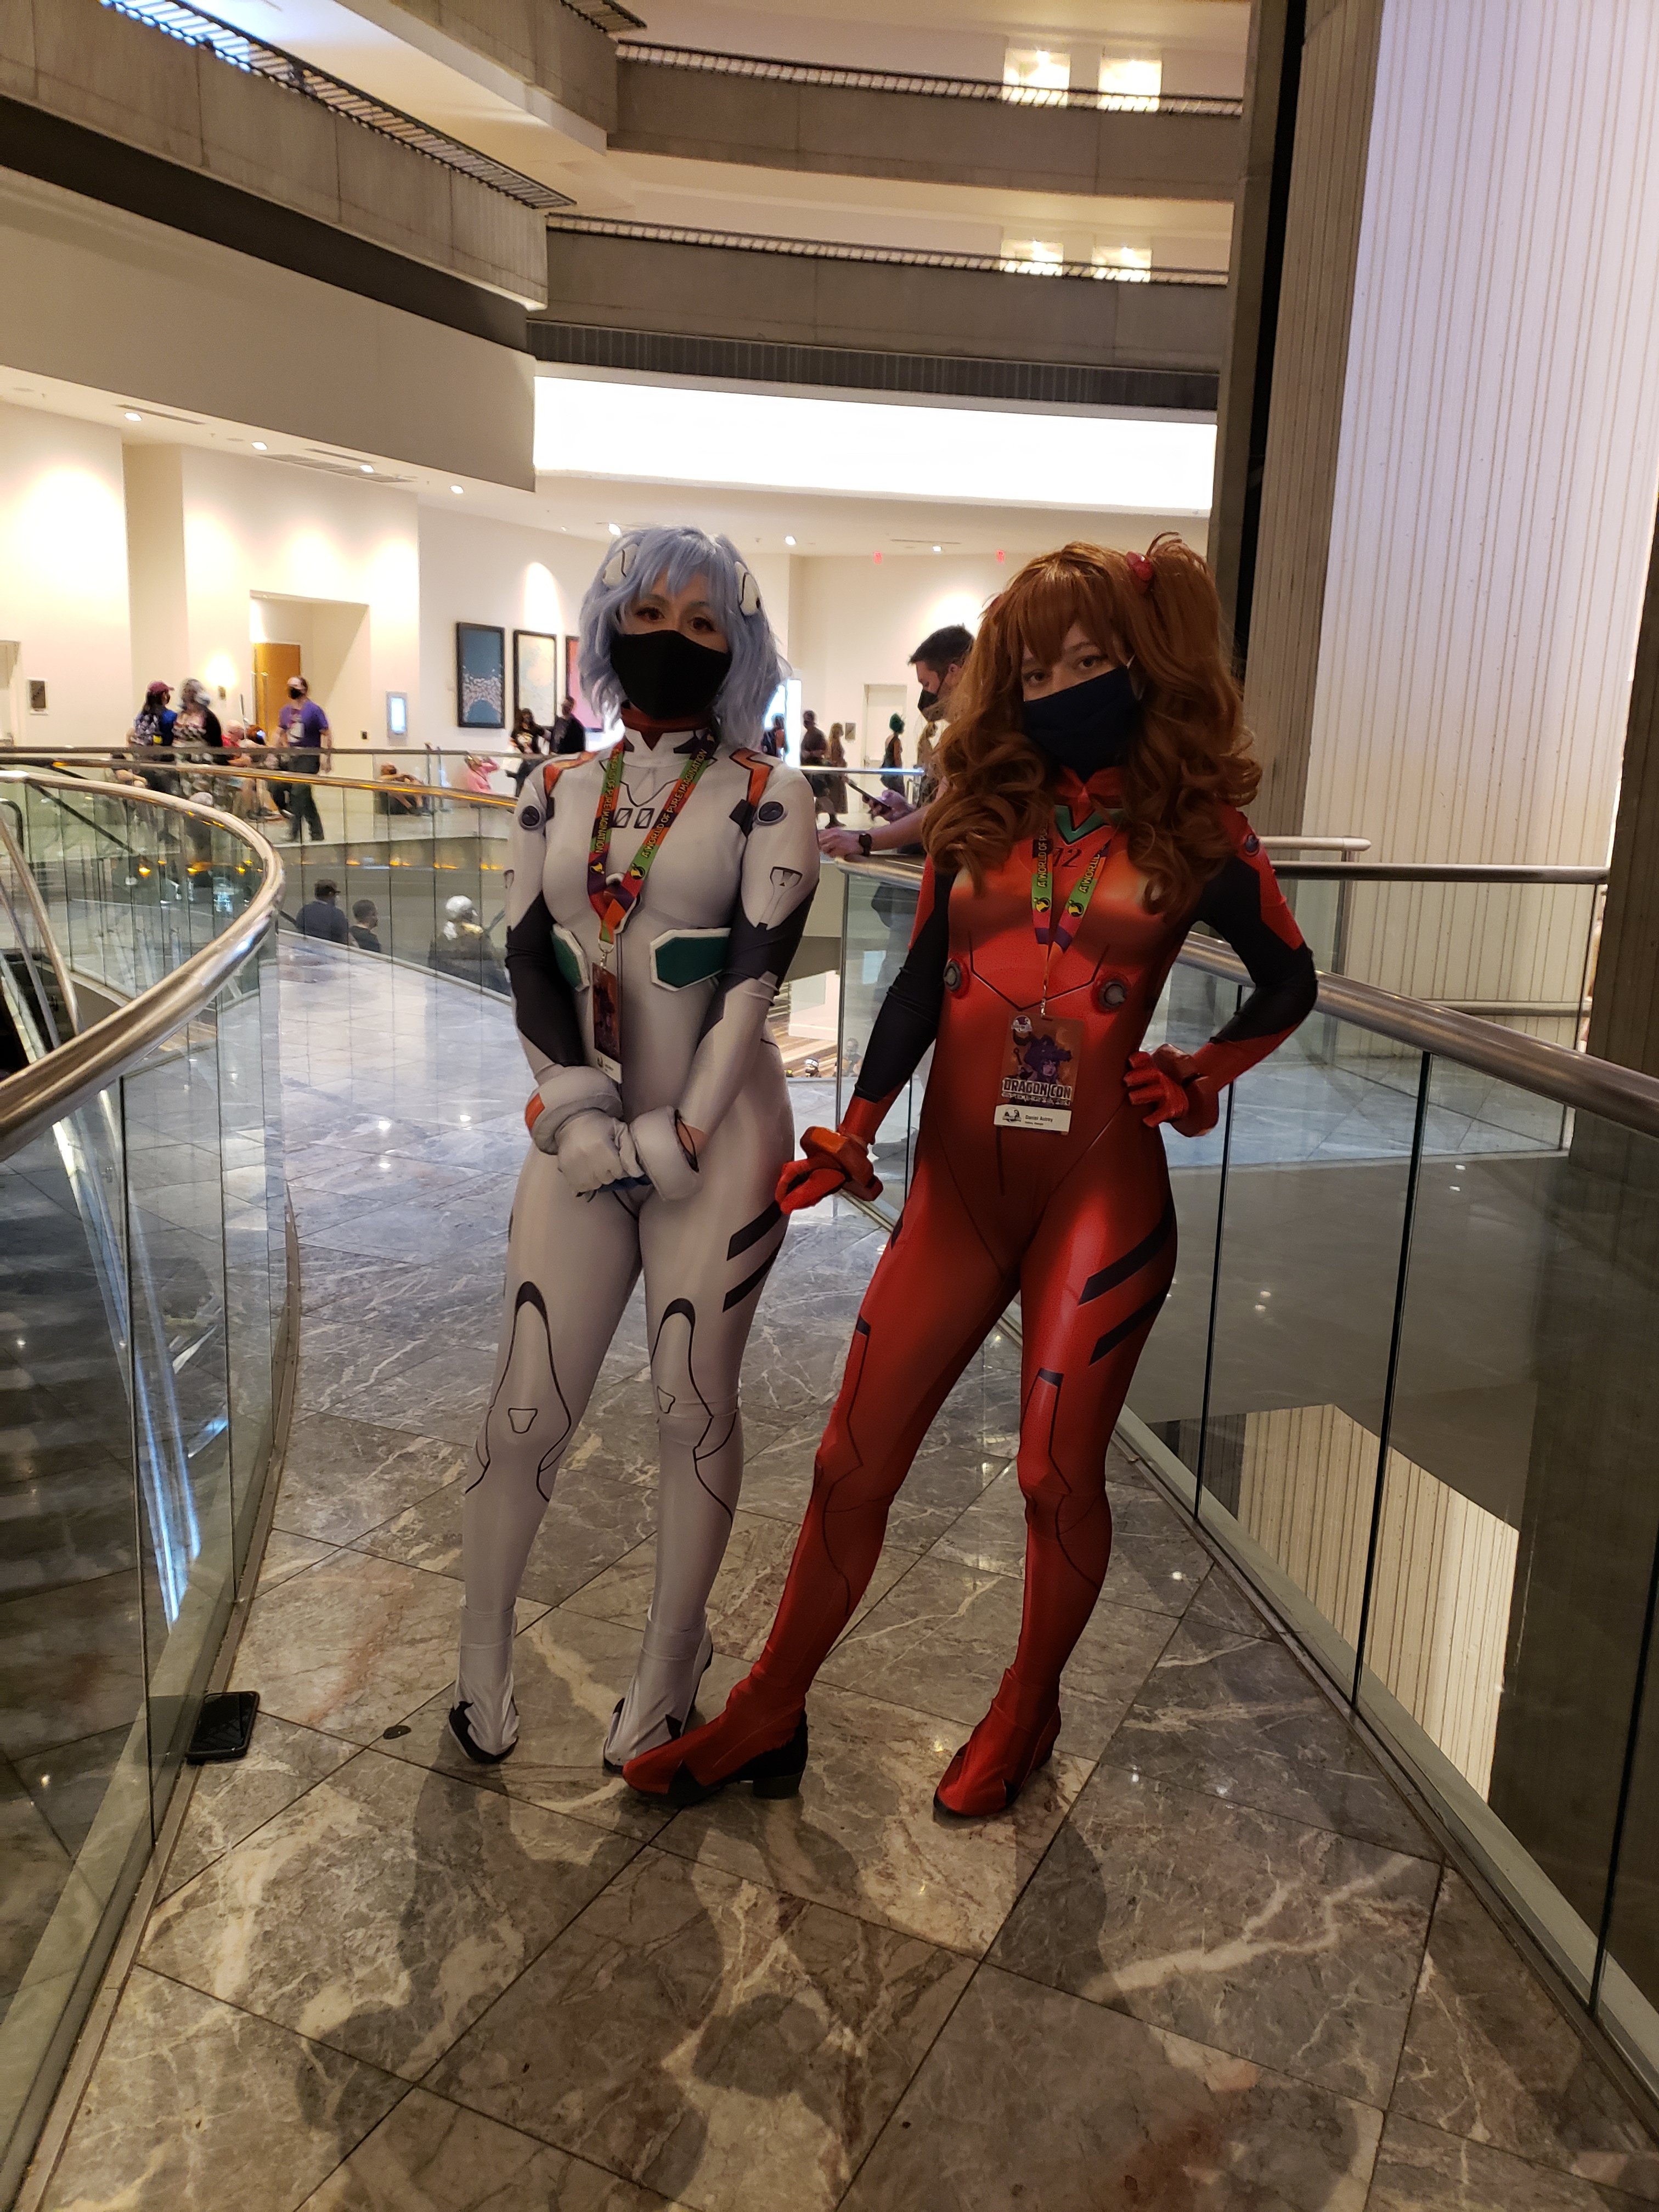 Rei and Asuka from Evangelion